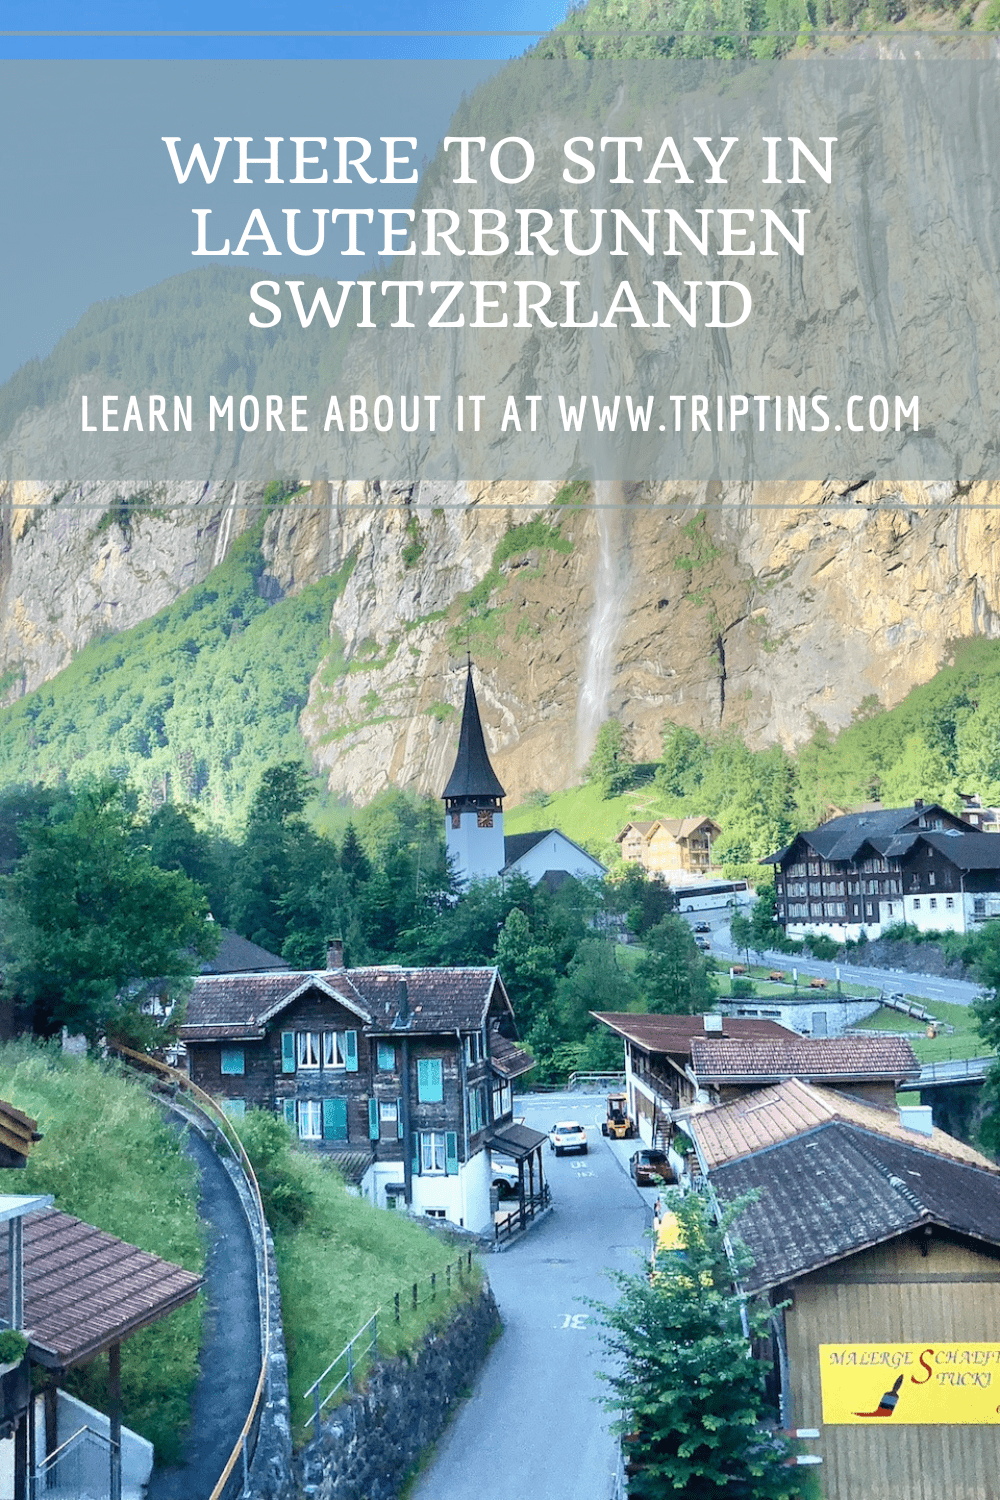 Where to Stay in Lauterbrunnen